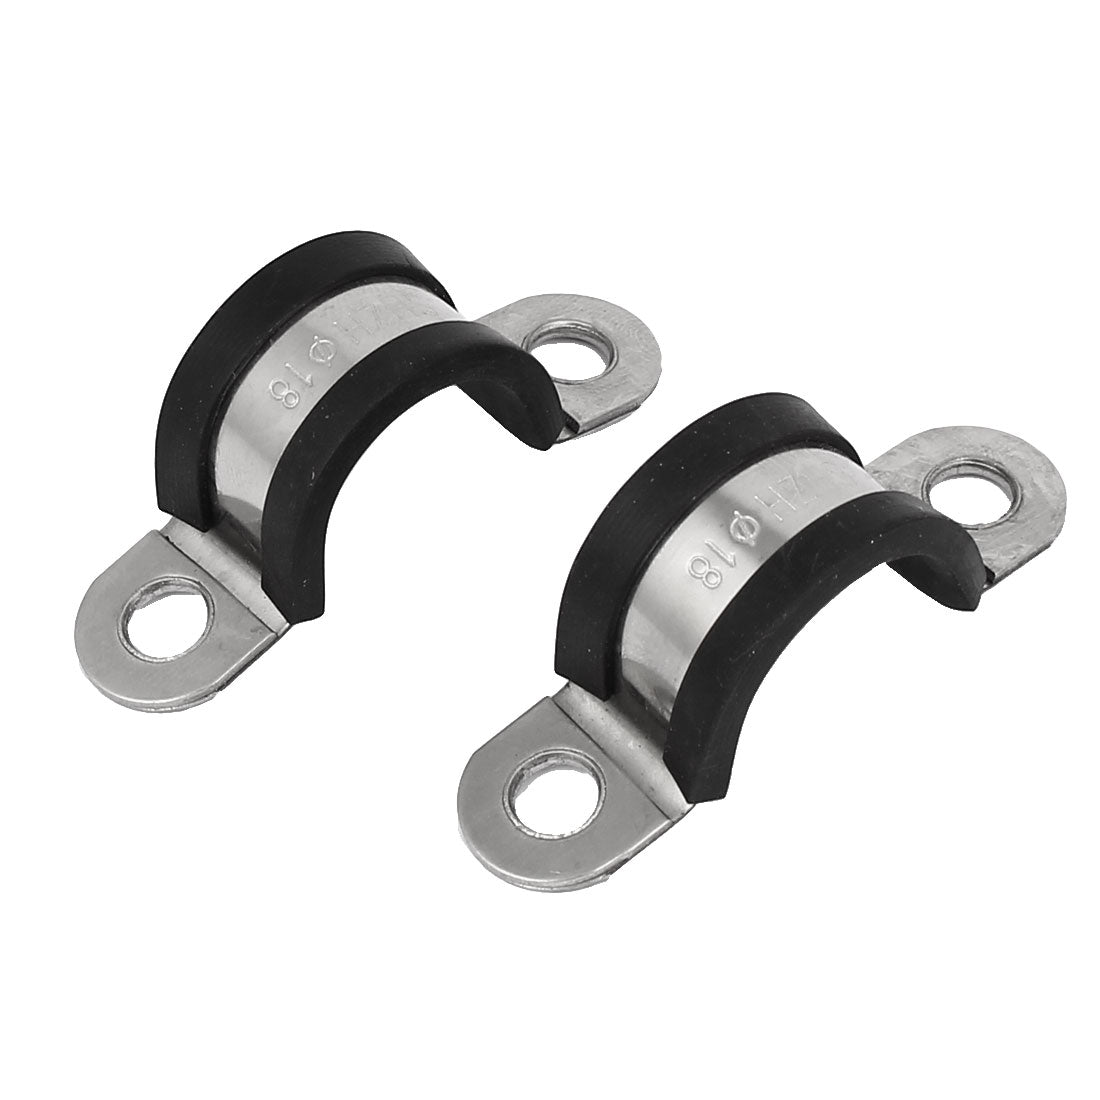 uxcell Uxcell 18mm U Clips EPDM Rubber Lined Mounting Brackets Clamps 5pcs for Pipe Tube Cable